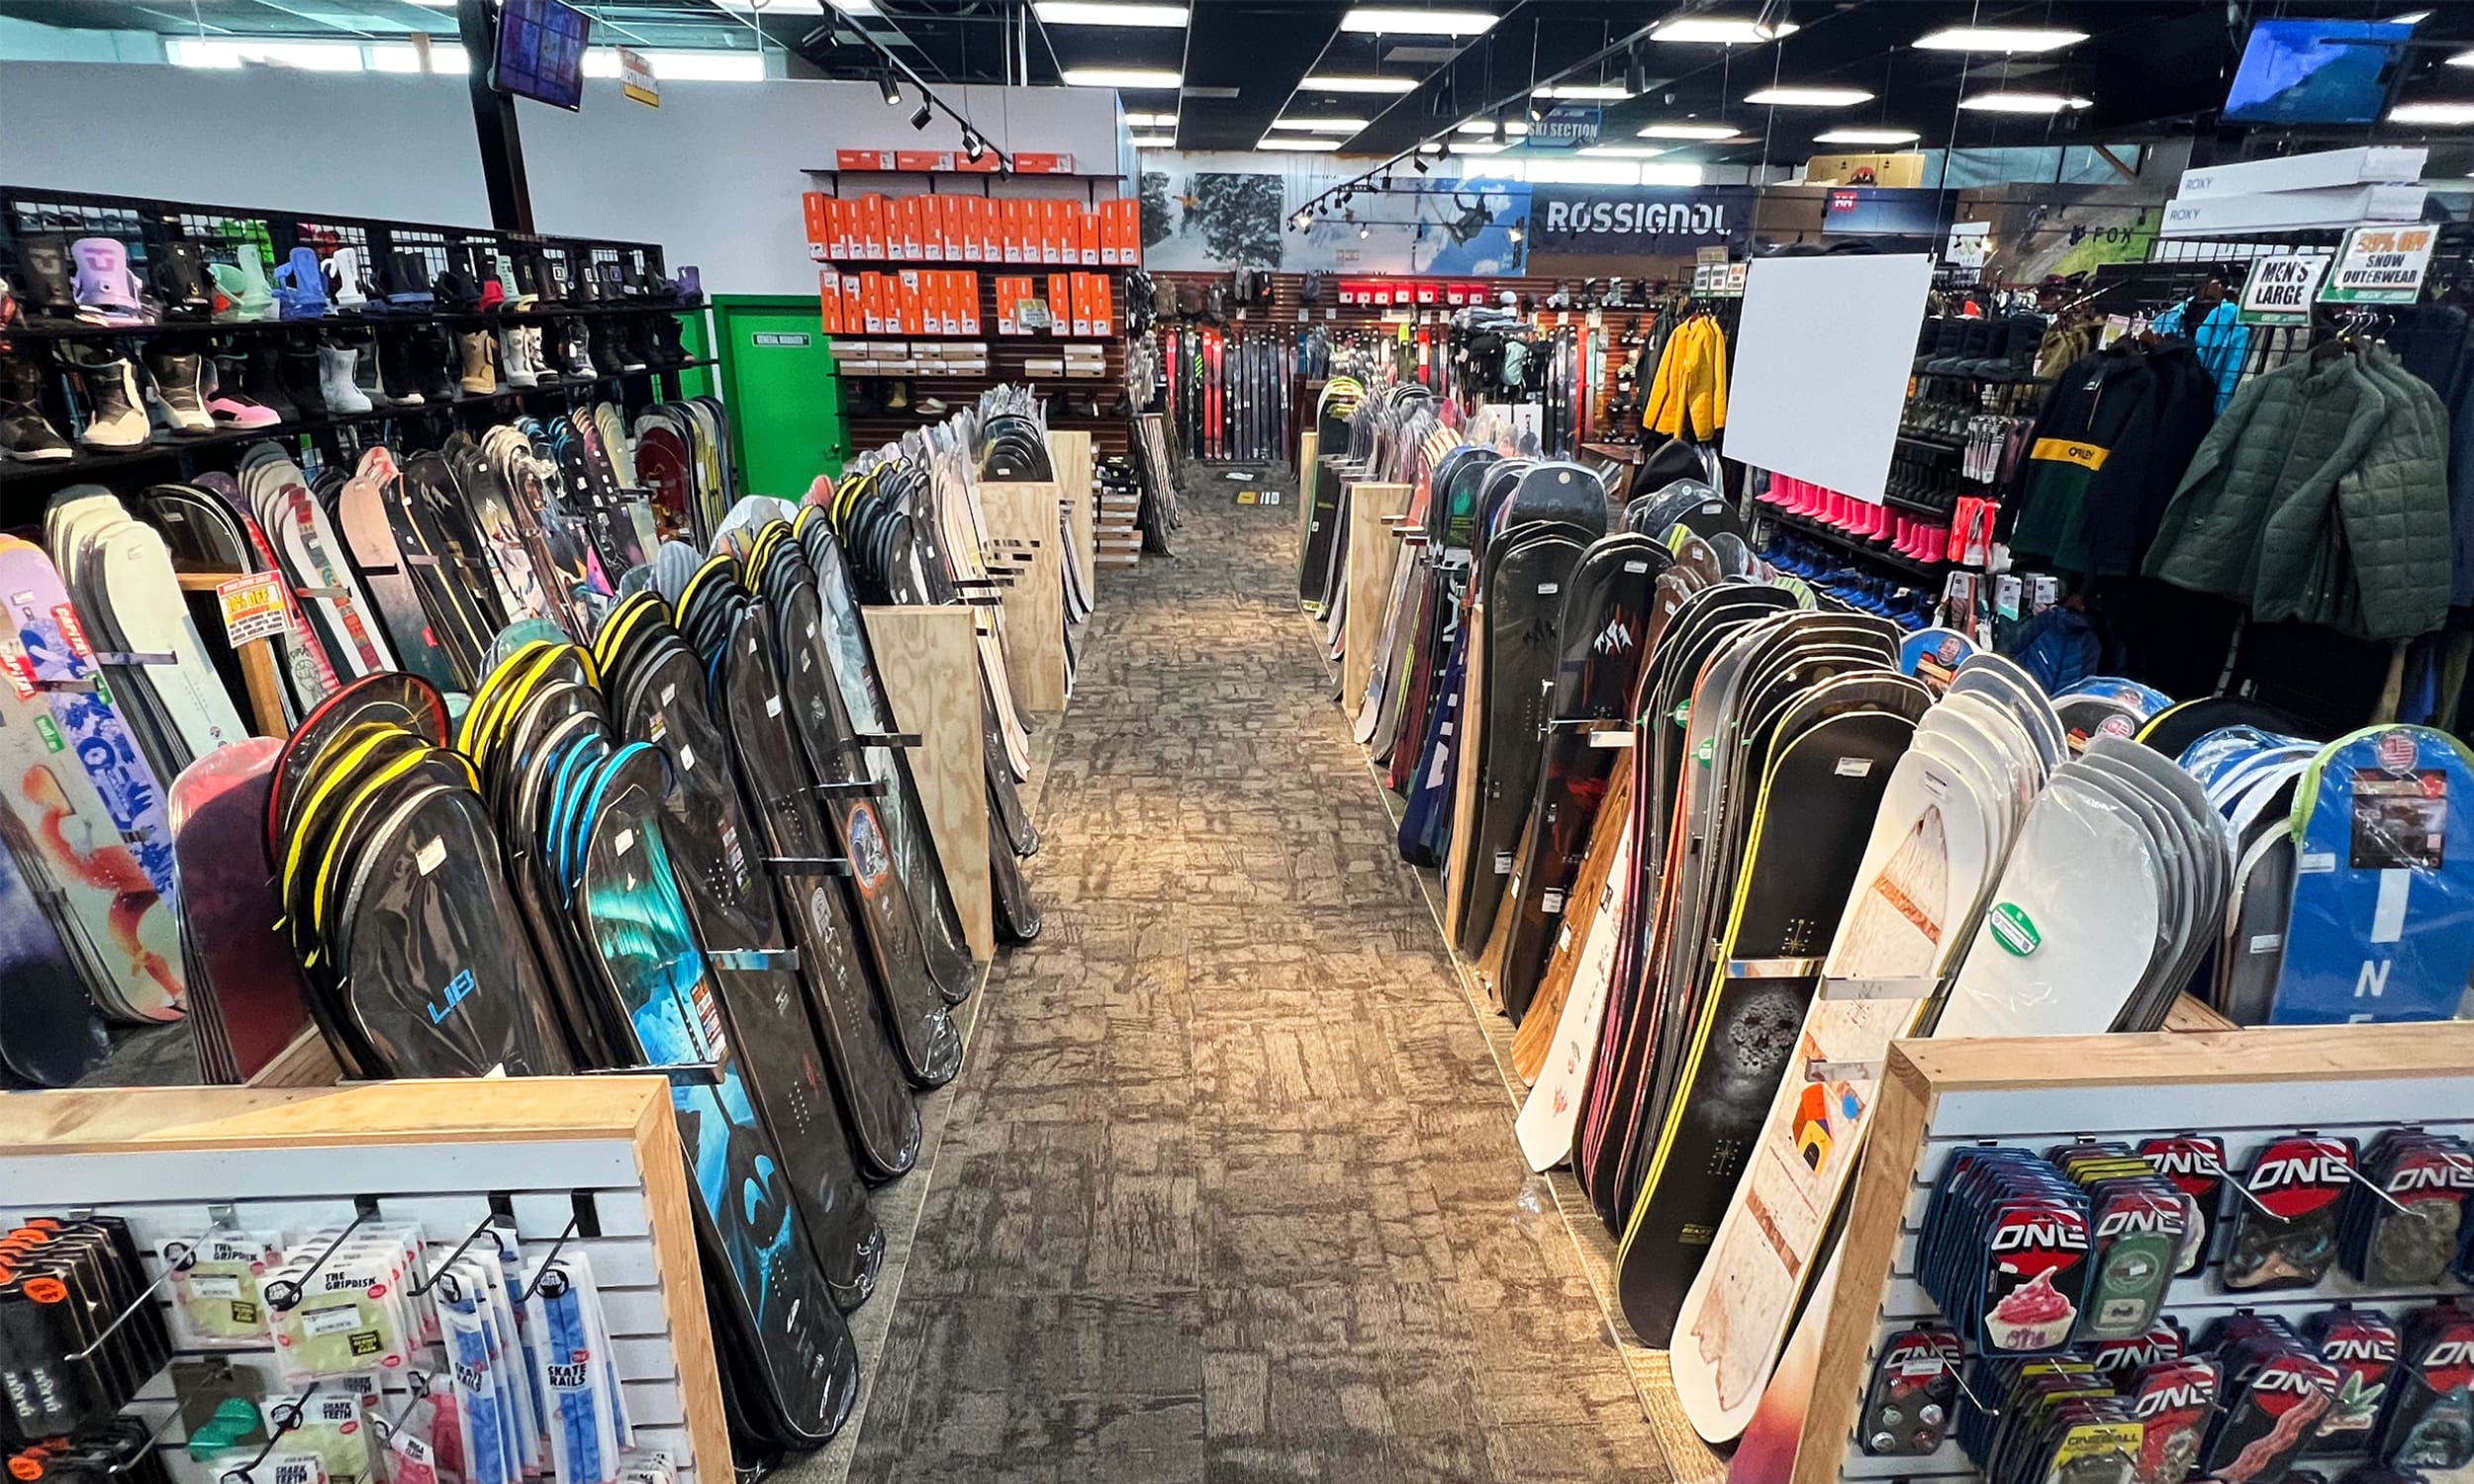 A long row of skis in the middle of a store.